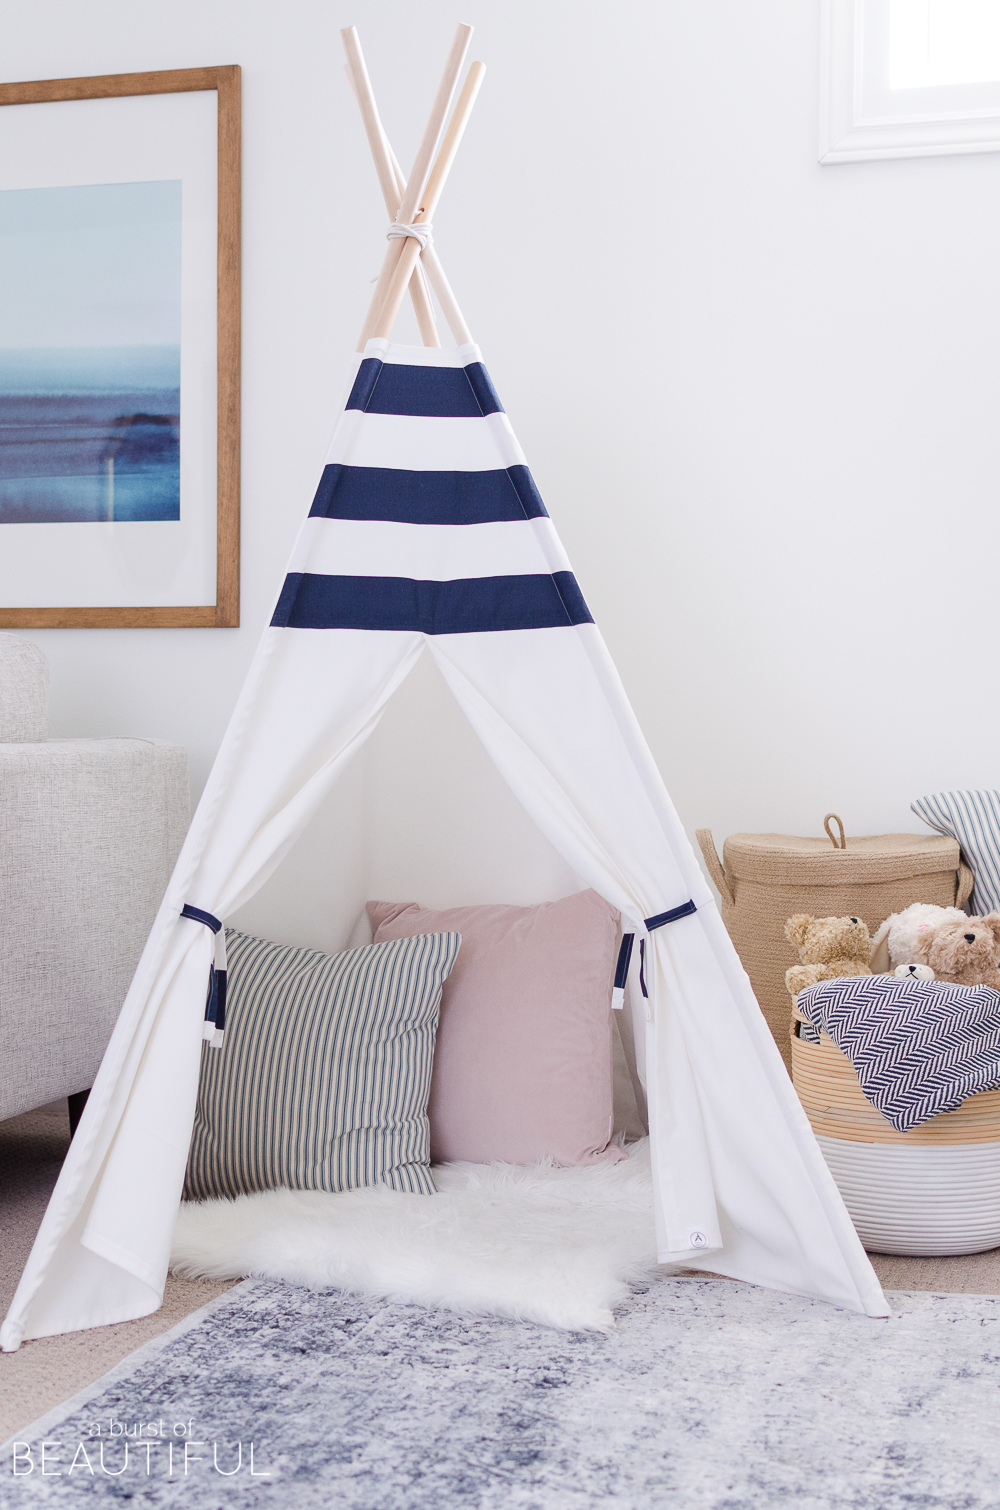 Hints of blue pop against bright white walls in this cheerful playroom, featuring a kid's desk, teepee and whimsical art.